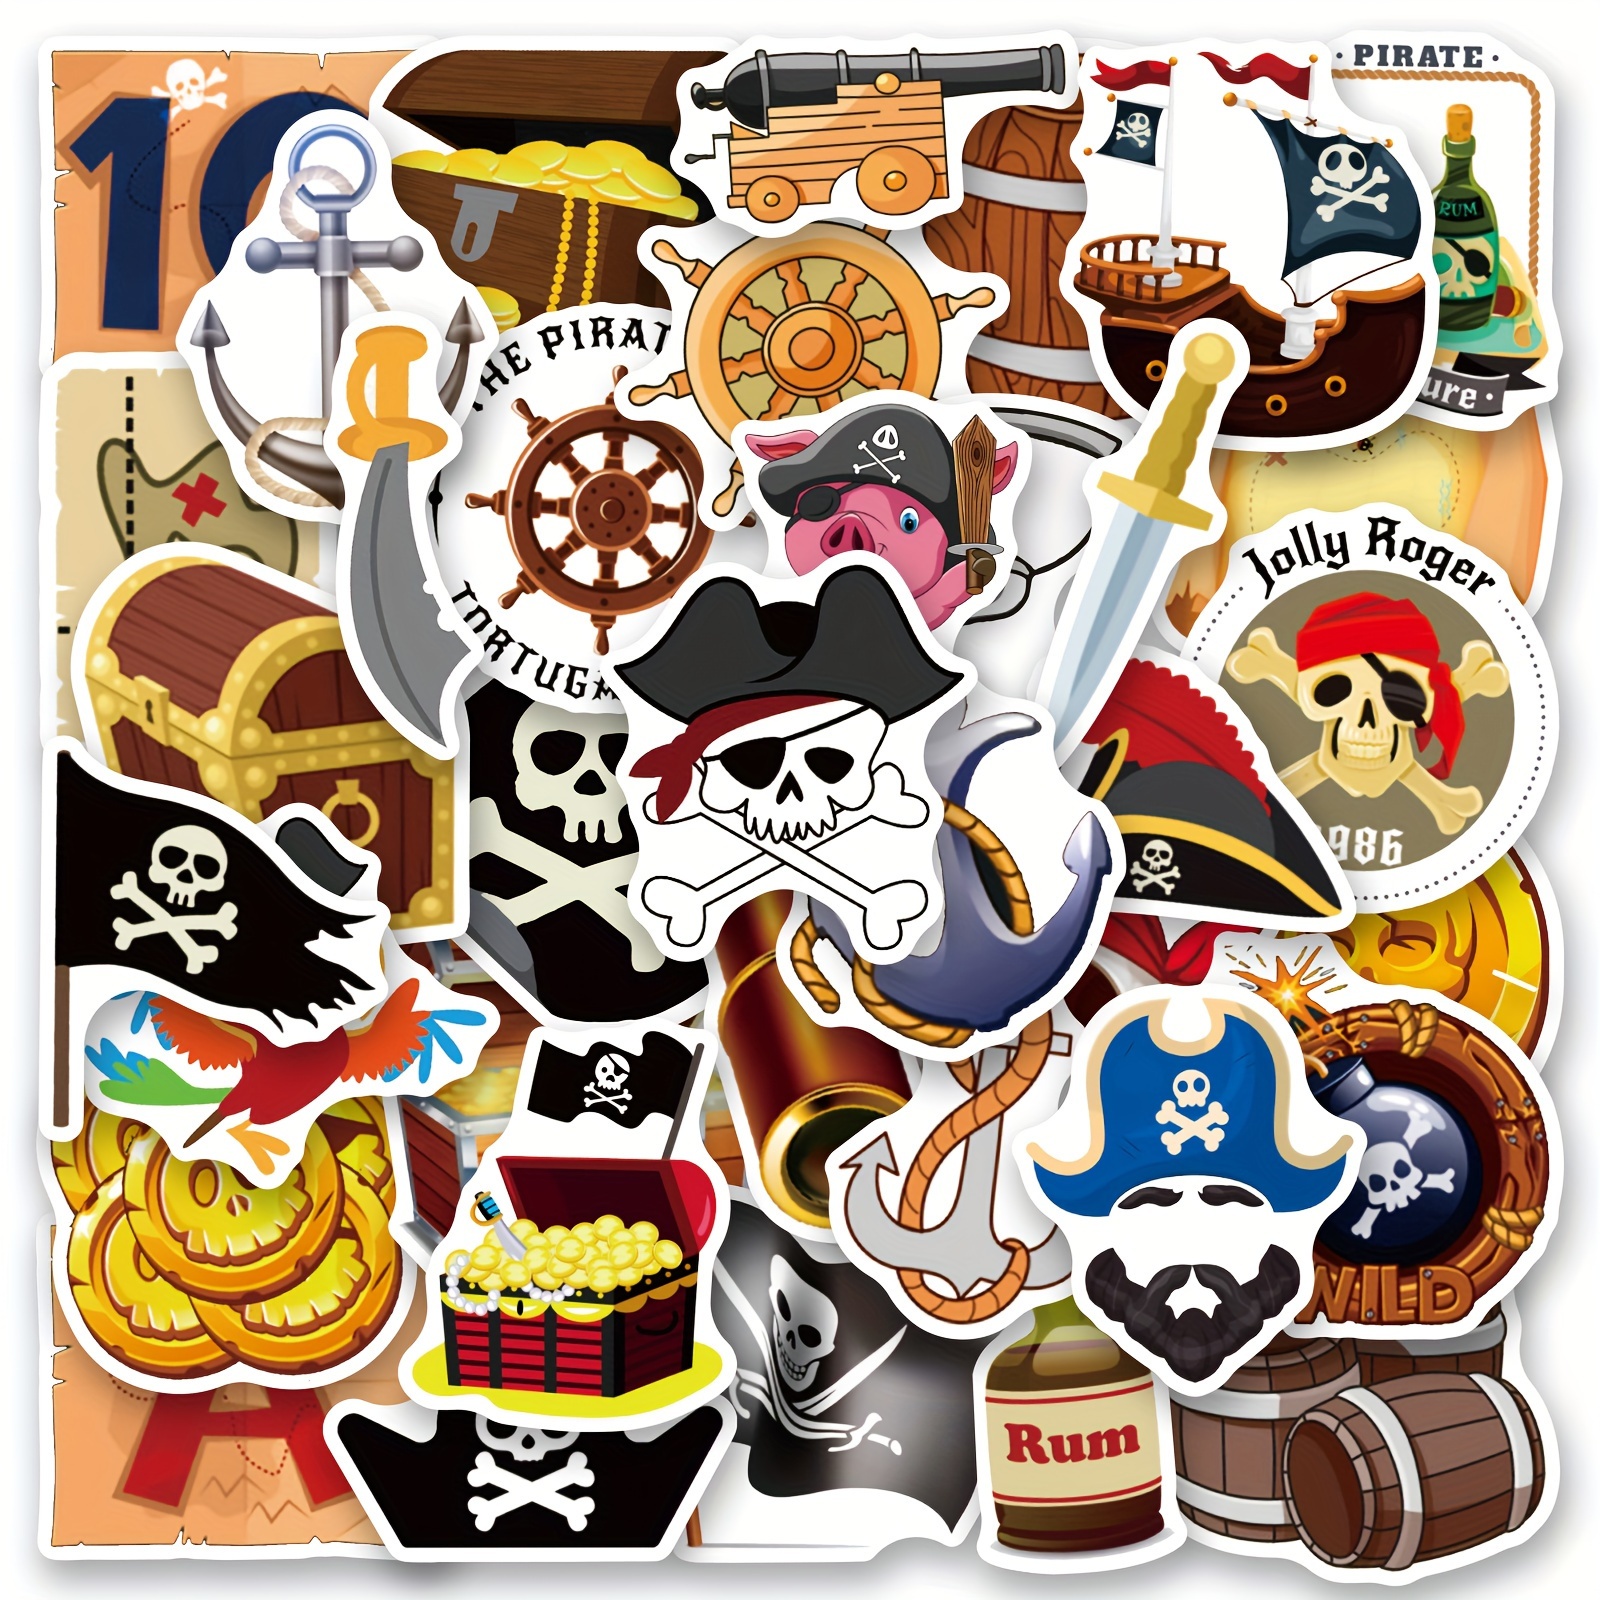 50pcs Pirate Stickers for Kids Teens Adults, Funny Pirate Crossbones Stickers, Cartoon Pirate Party Decorations Stickers for Laptops Water Bottles